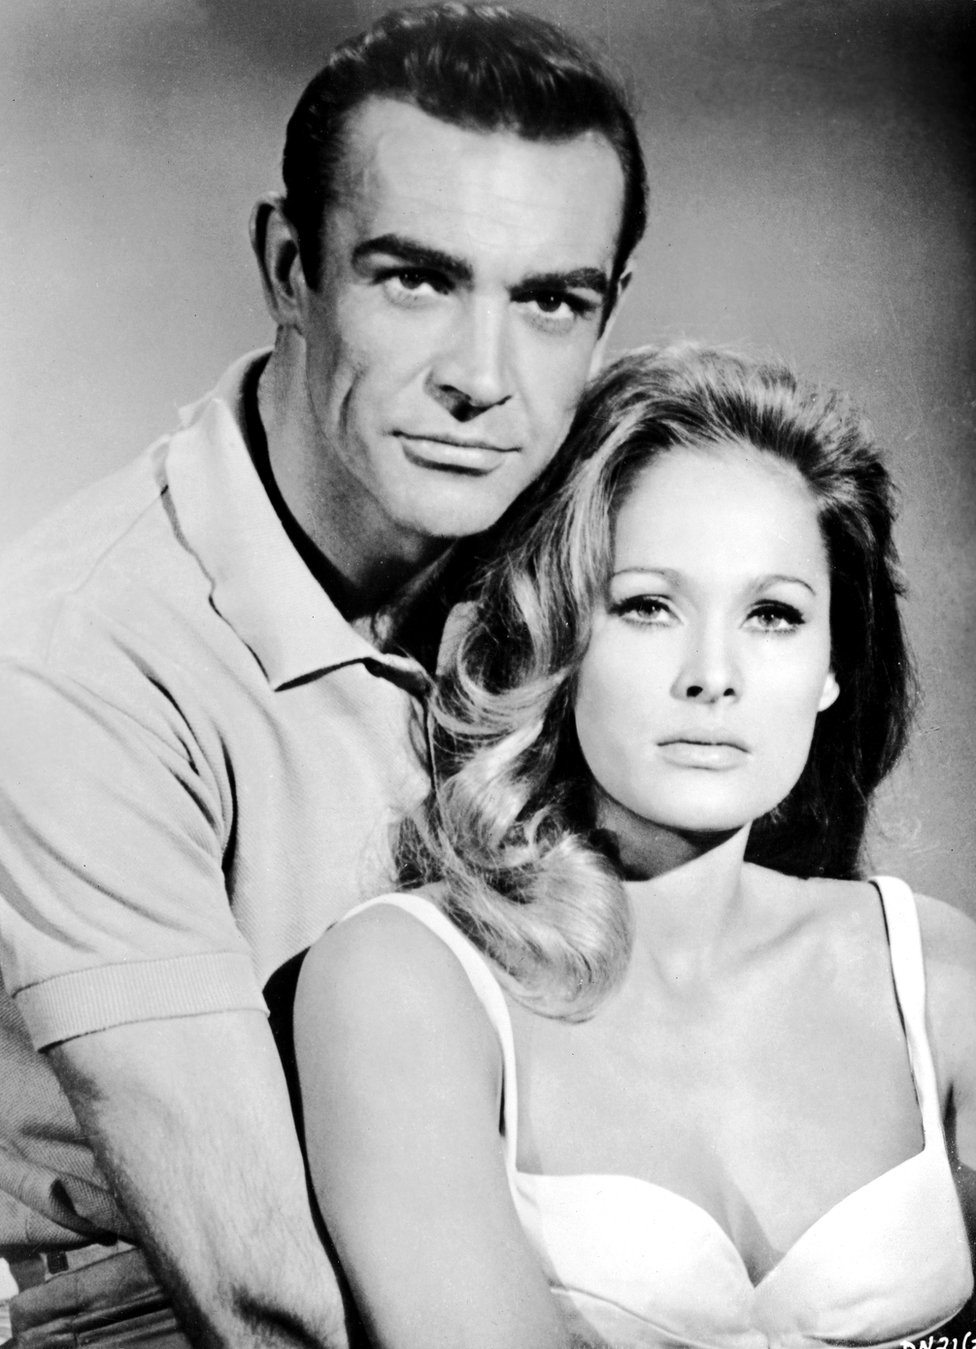 Sean Connery in Dr No with Ursula Andress